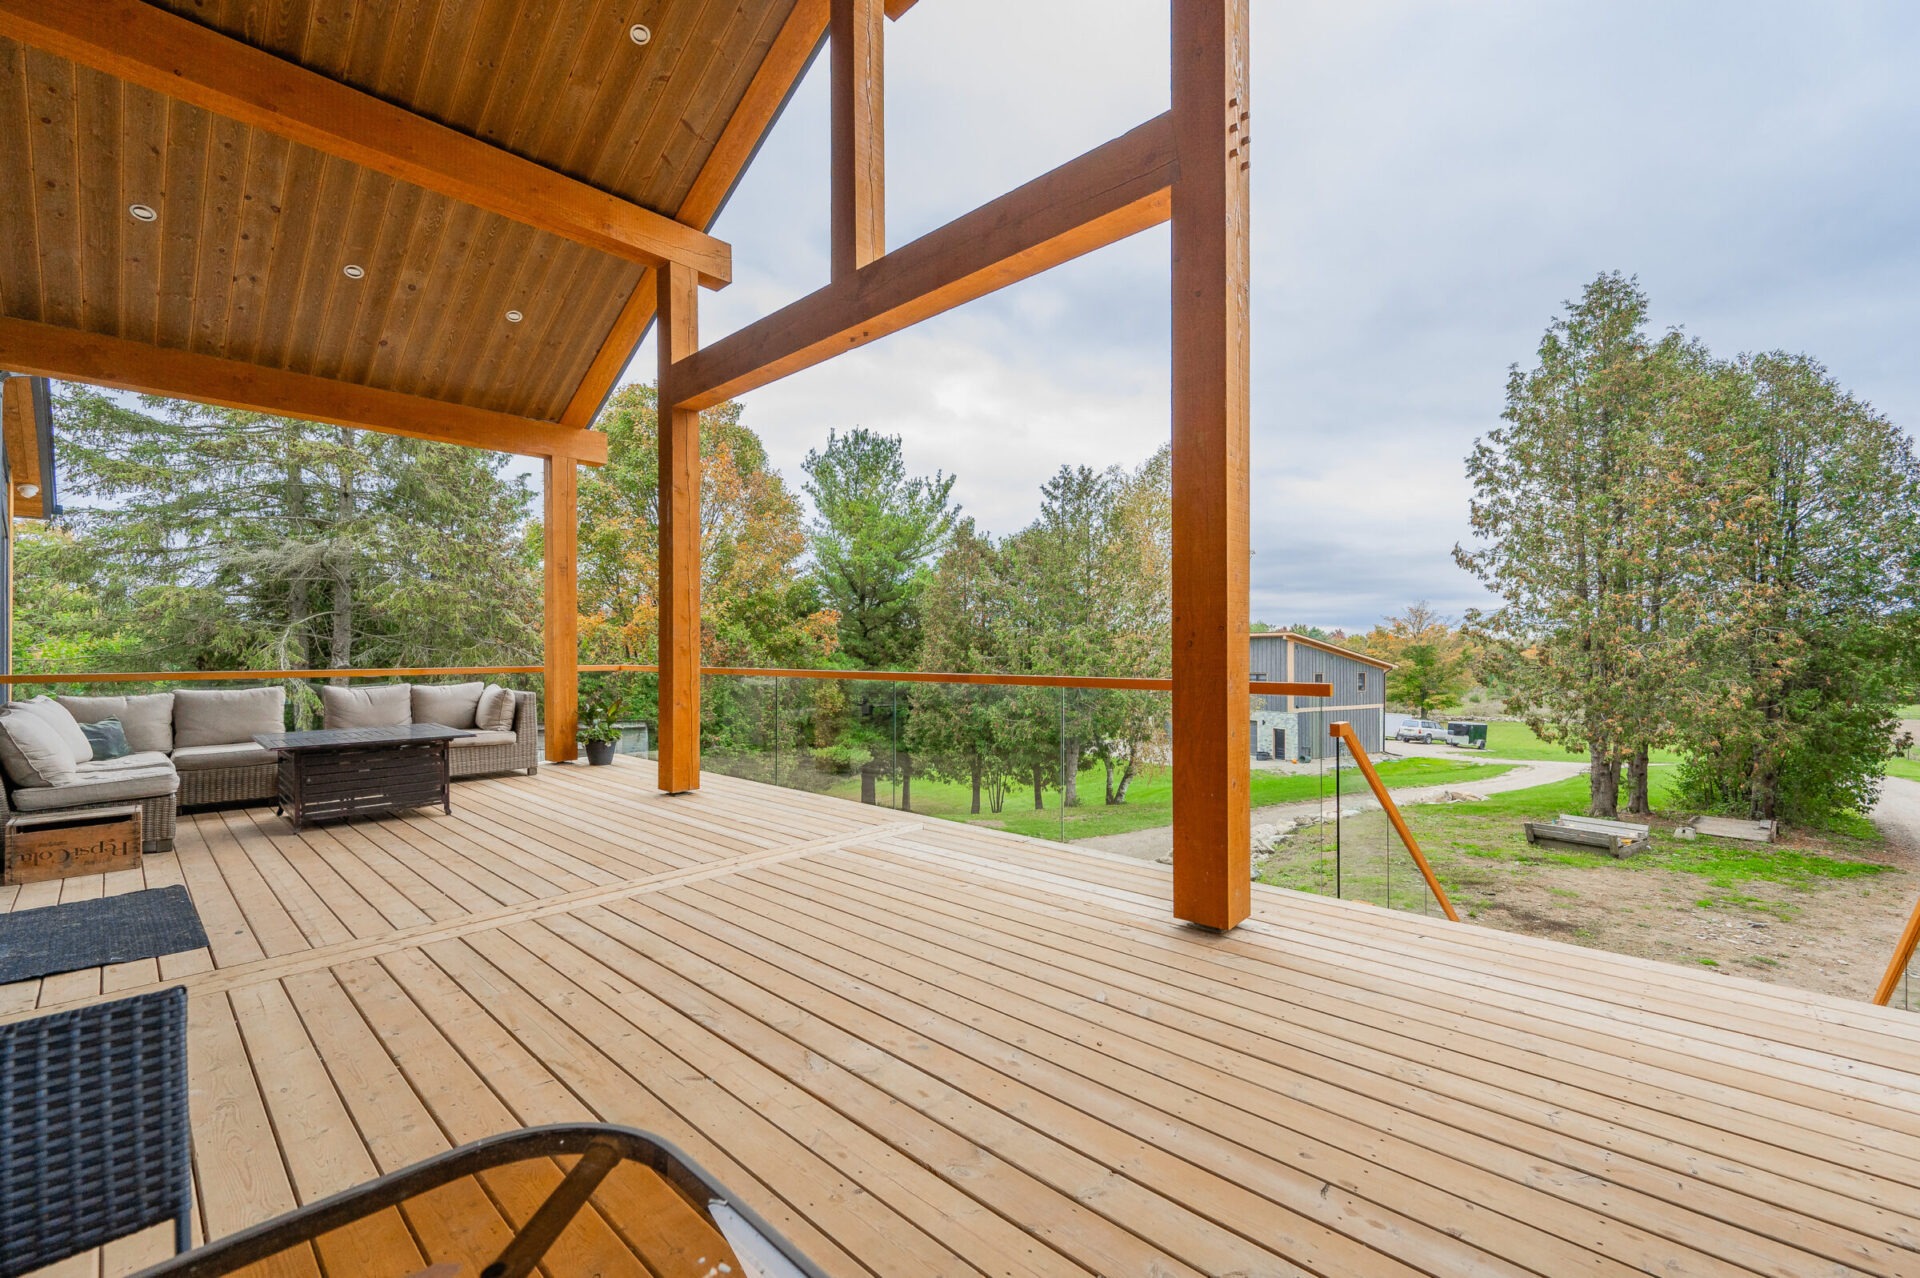 A spacious wooden deck with outdoor furniture overlooks a serene landscape with trees and a grassy area. The deck has a covered section with exposed beams.